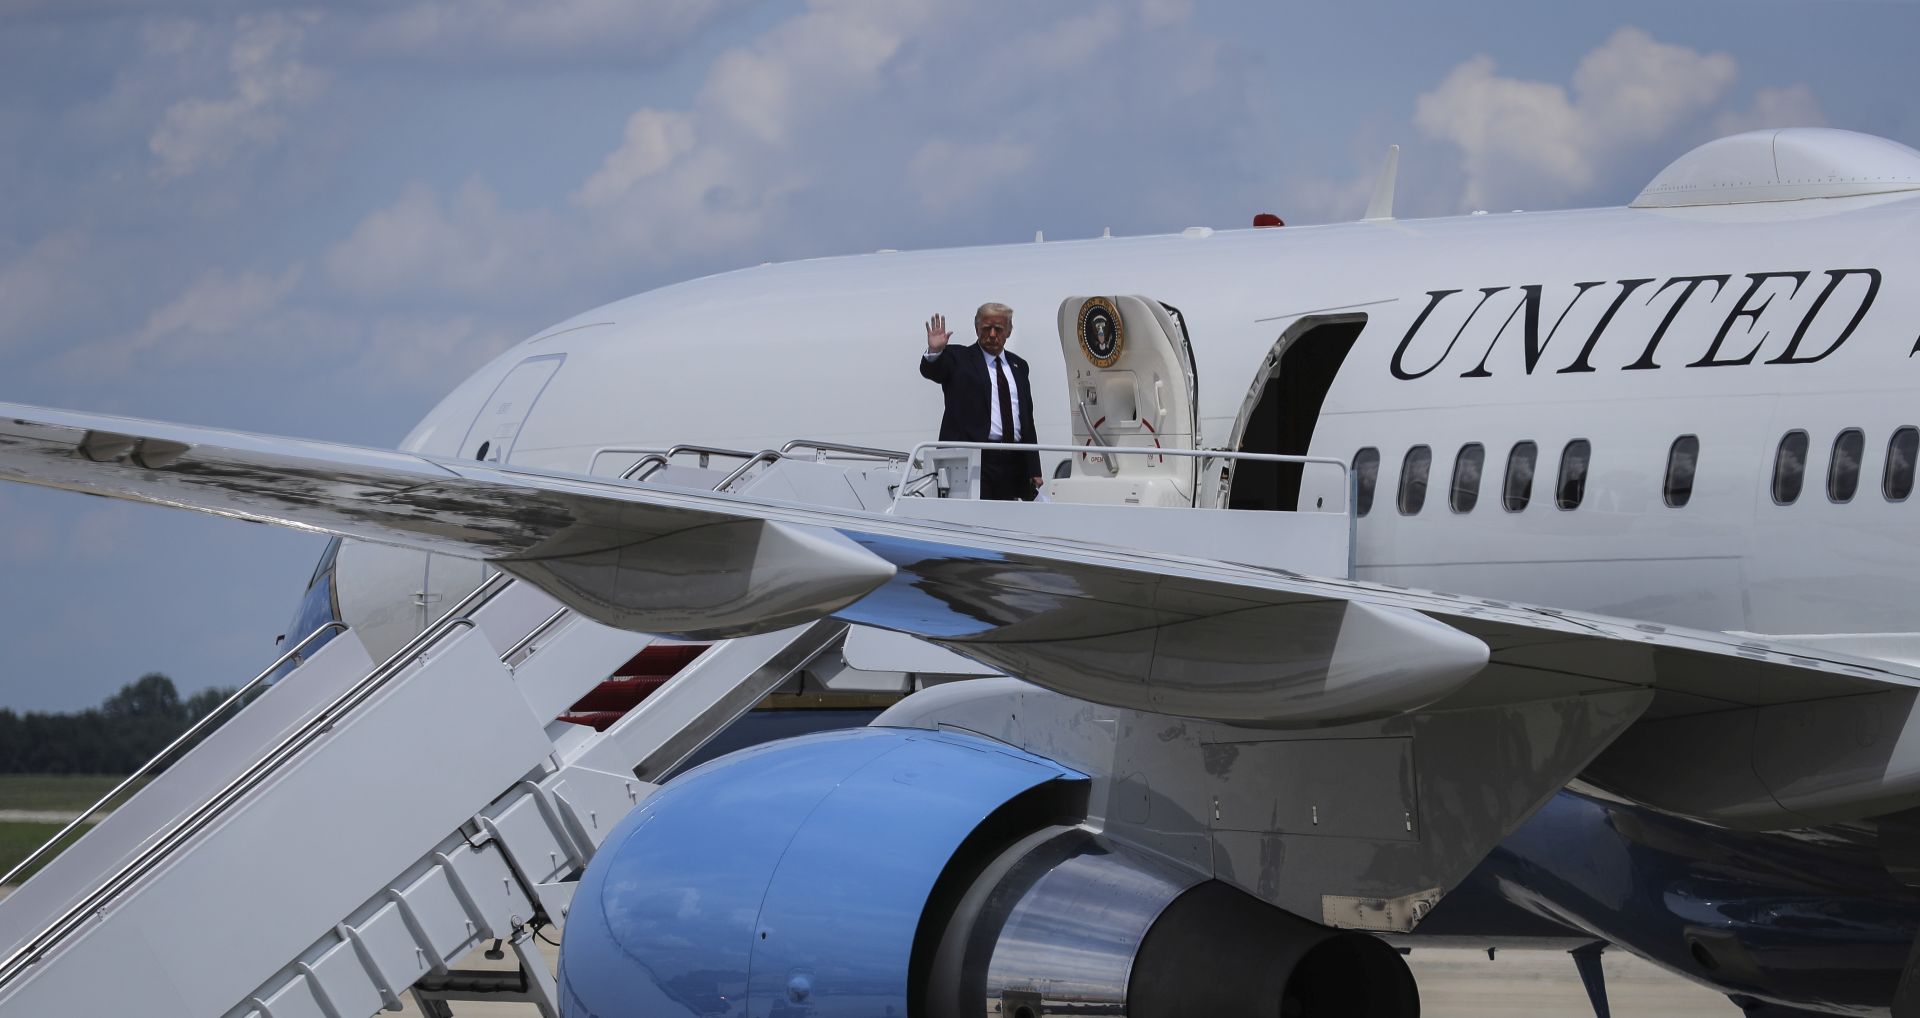 epa08615123 US President Donald J. Trump waves as he boards Air Force One at Andrews Air Force Base, Maryland, USA, on 20 August 2020. Trump travels to Old Forge, PA, to deliver remarks at Mariotti Building Products.  EPA/Oliver Contreras / POOL